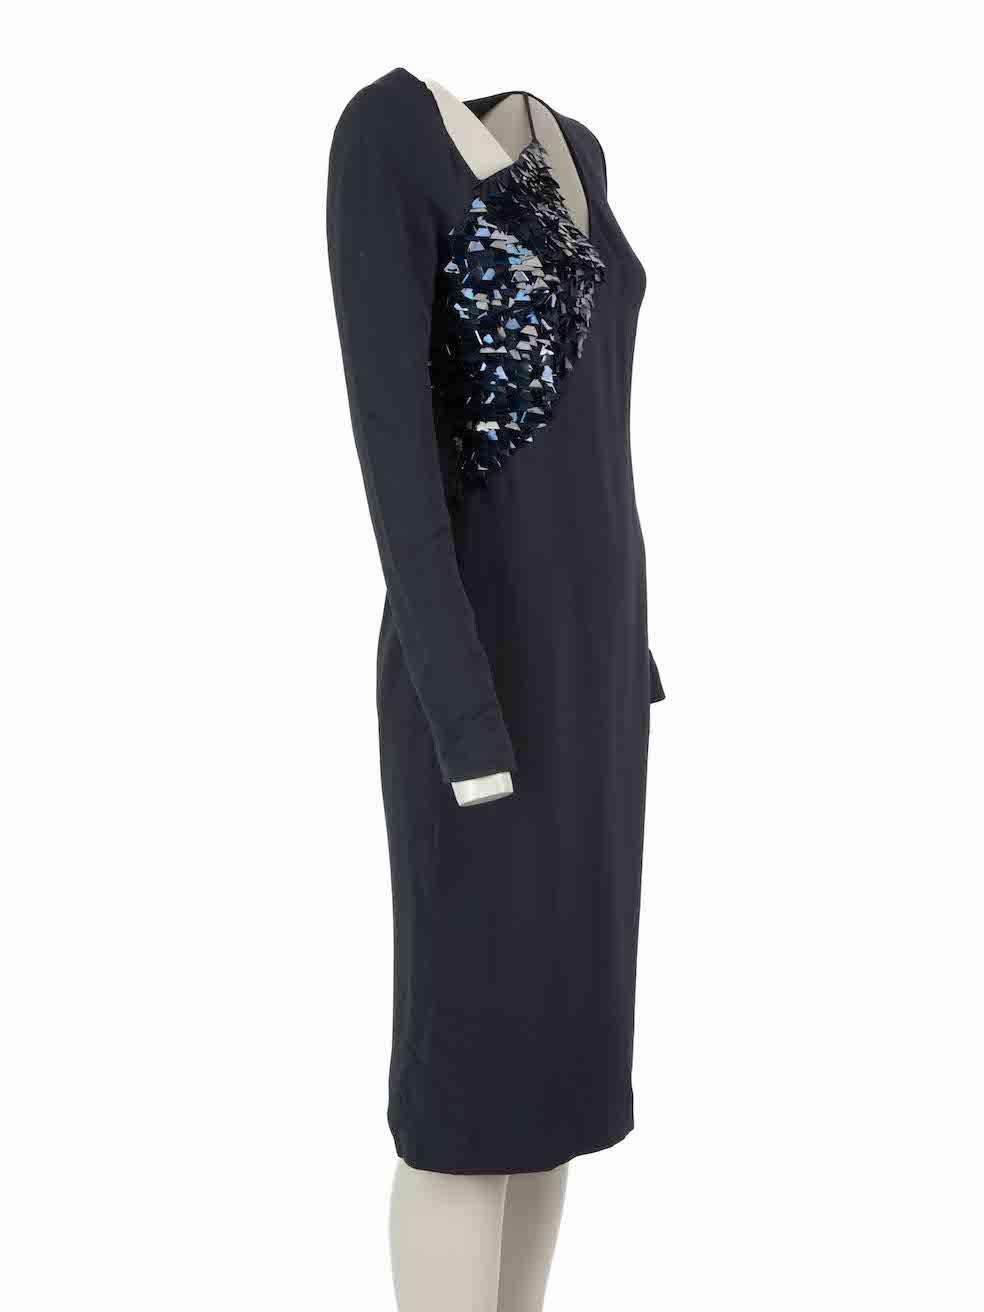 CONDITION is Good. General wear to dress is evident. Moderate signs of wear to overall fabric with pilling under right arm and a minor pull to fabric on the bodice of this used Cushnie et Ochs designer resale item.
 
Details
Navy
Silk
Midi dress
Cut